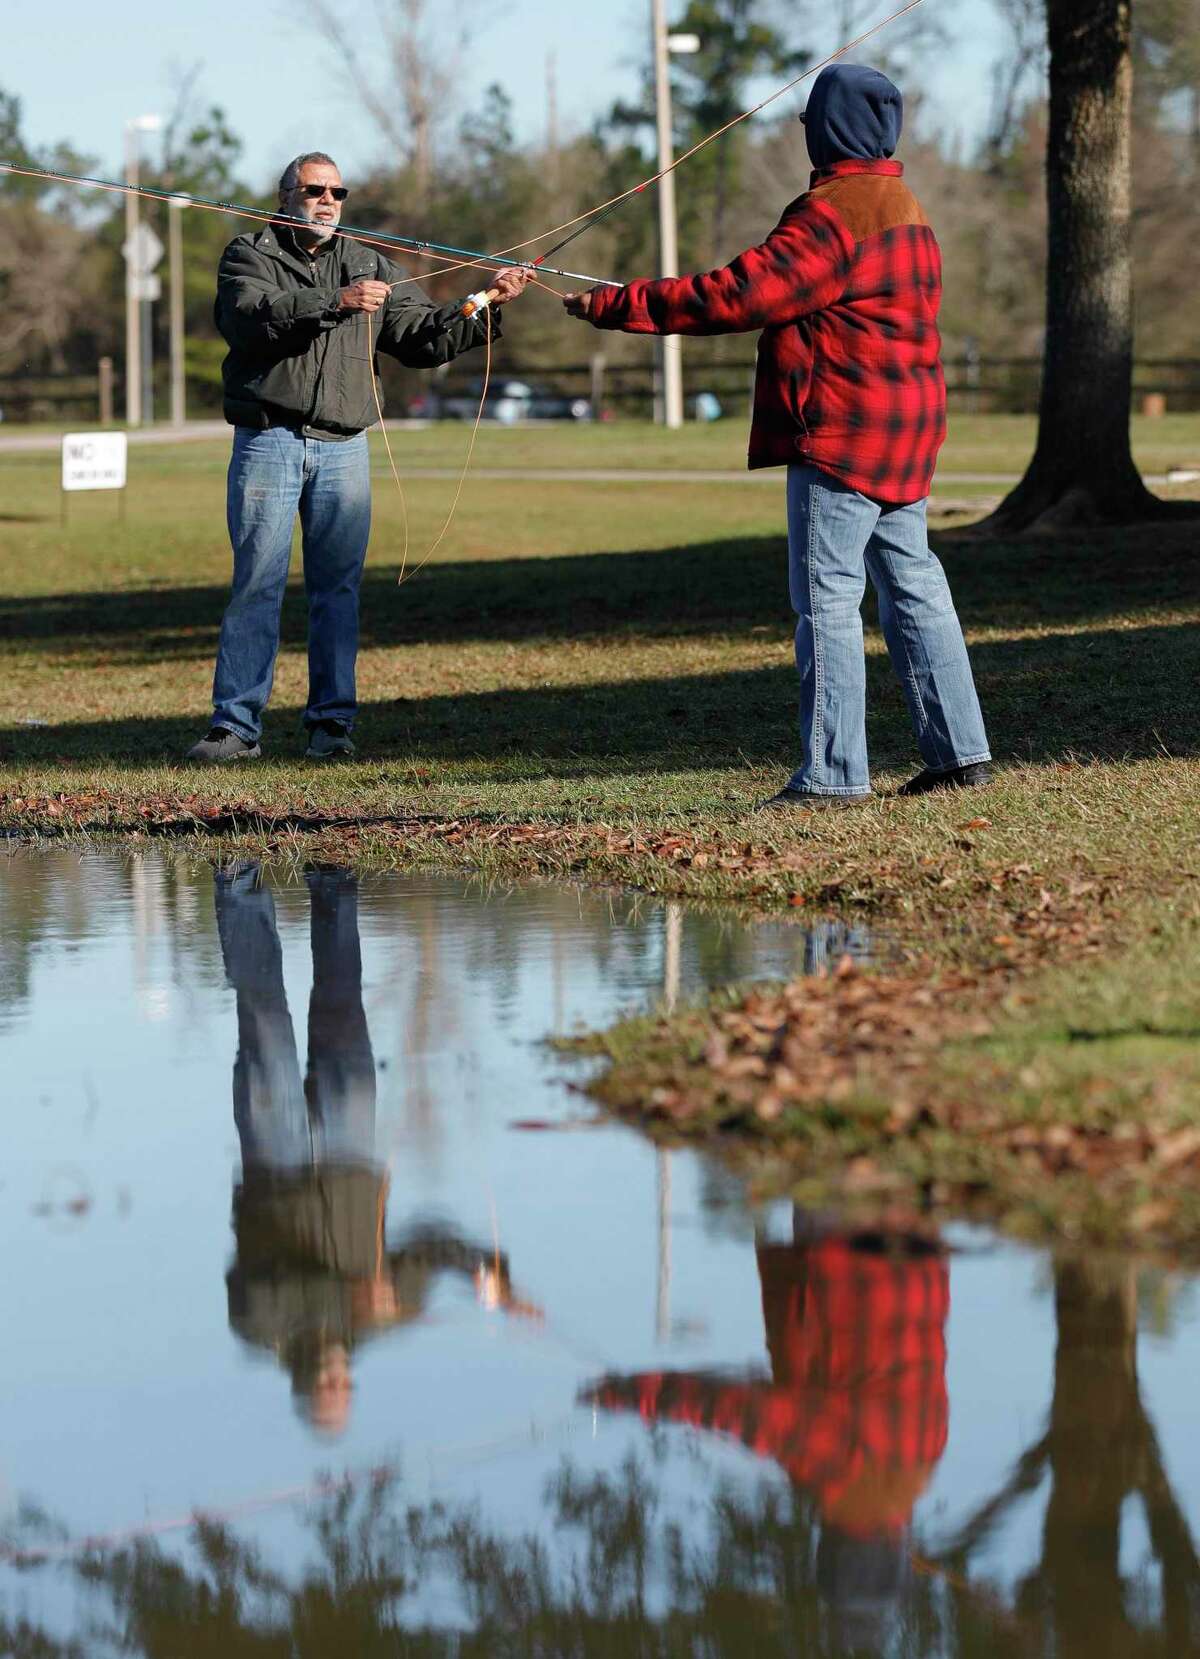 Army veteran Alan Corder, center, helps fellow Army veteran Carolyn Rhodes learn to fly fish as members of the Conroe Fly Fishers met to fish at Carl Barton, Jr. Park, Thursday, Jan. 23, 2020, in Conroe. The organization mets twice a month and is a part of the national nonprofit, Project Healing Waters Fly Fishing, which helps 8,300 disabled veterans nationwide with various treatments.